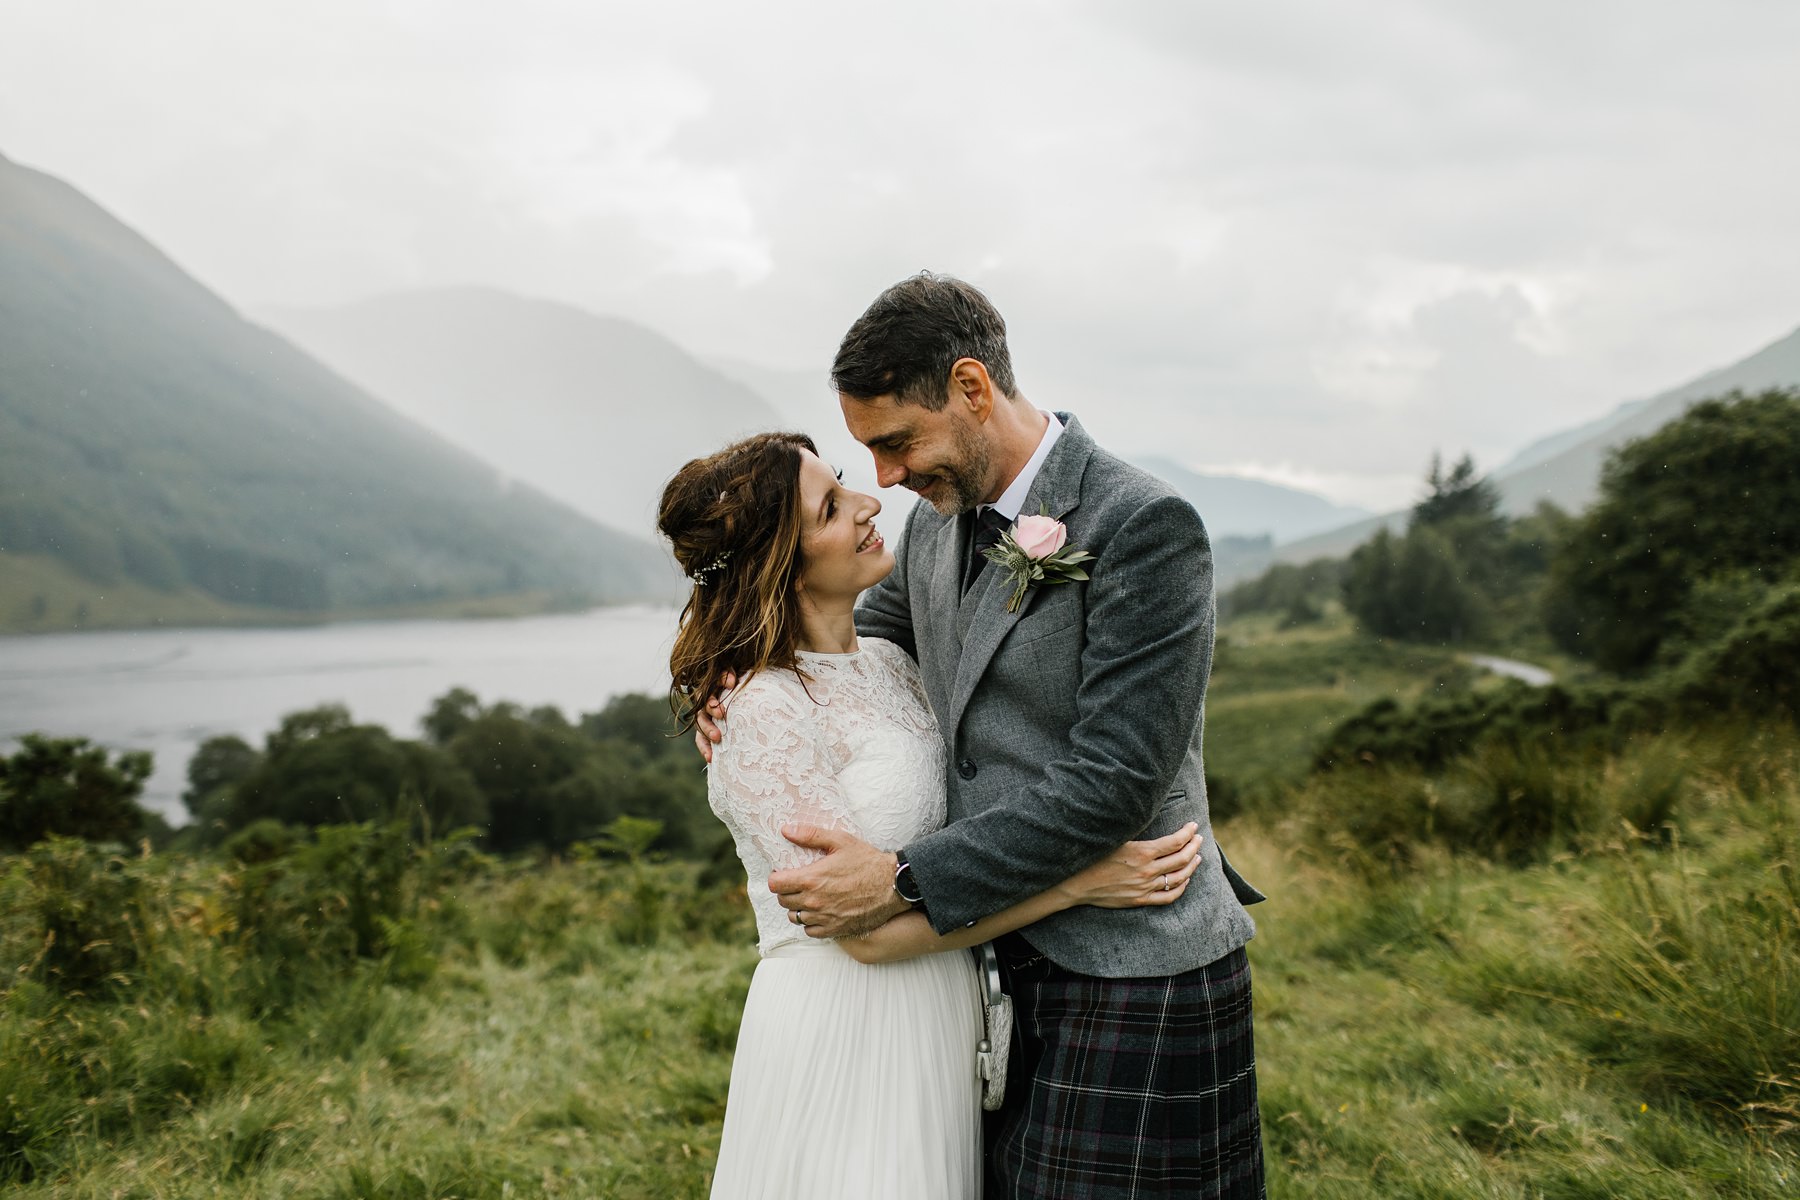 raw files explained toronto wedding photographer photo of bride groom in scottish higlands with mountains and loch